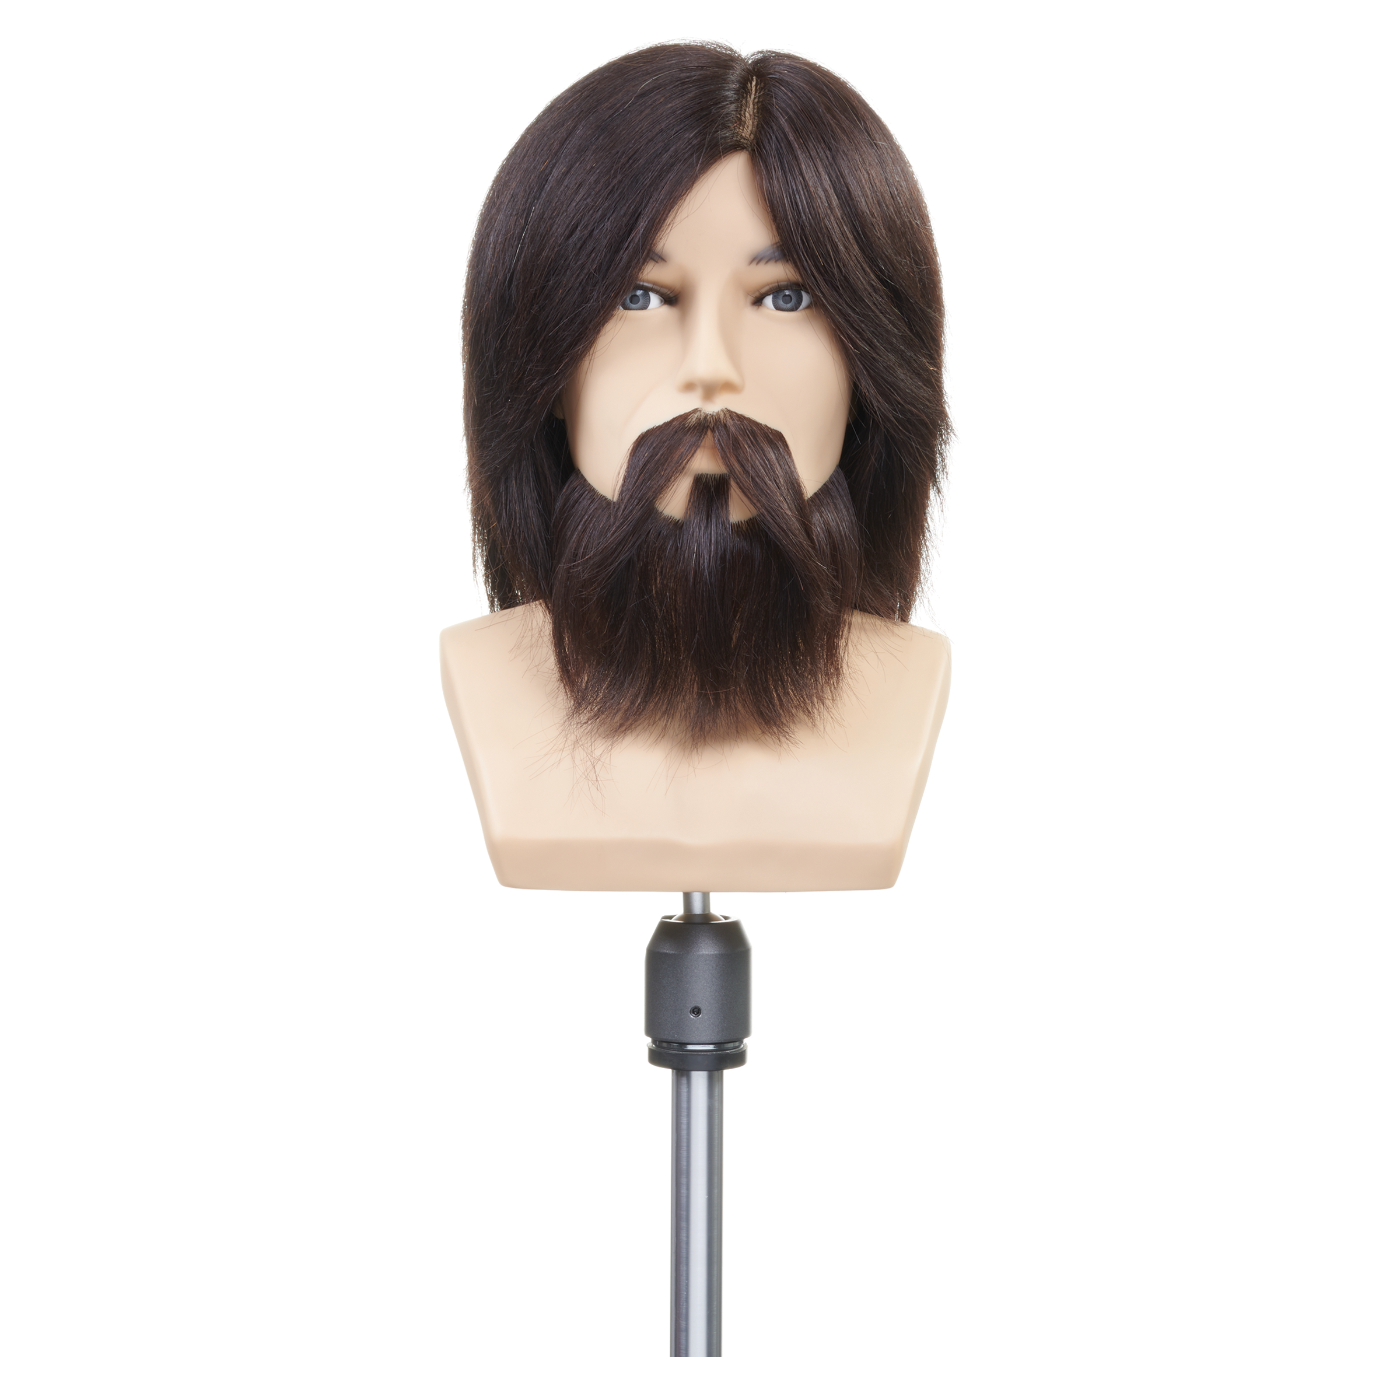 Bearded Male Competition Mannequin - 100% Human Hair